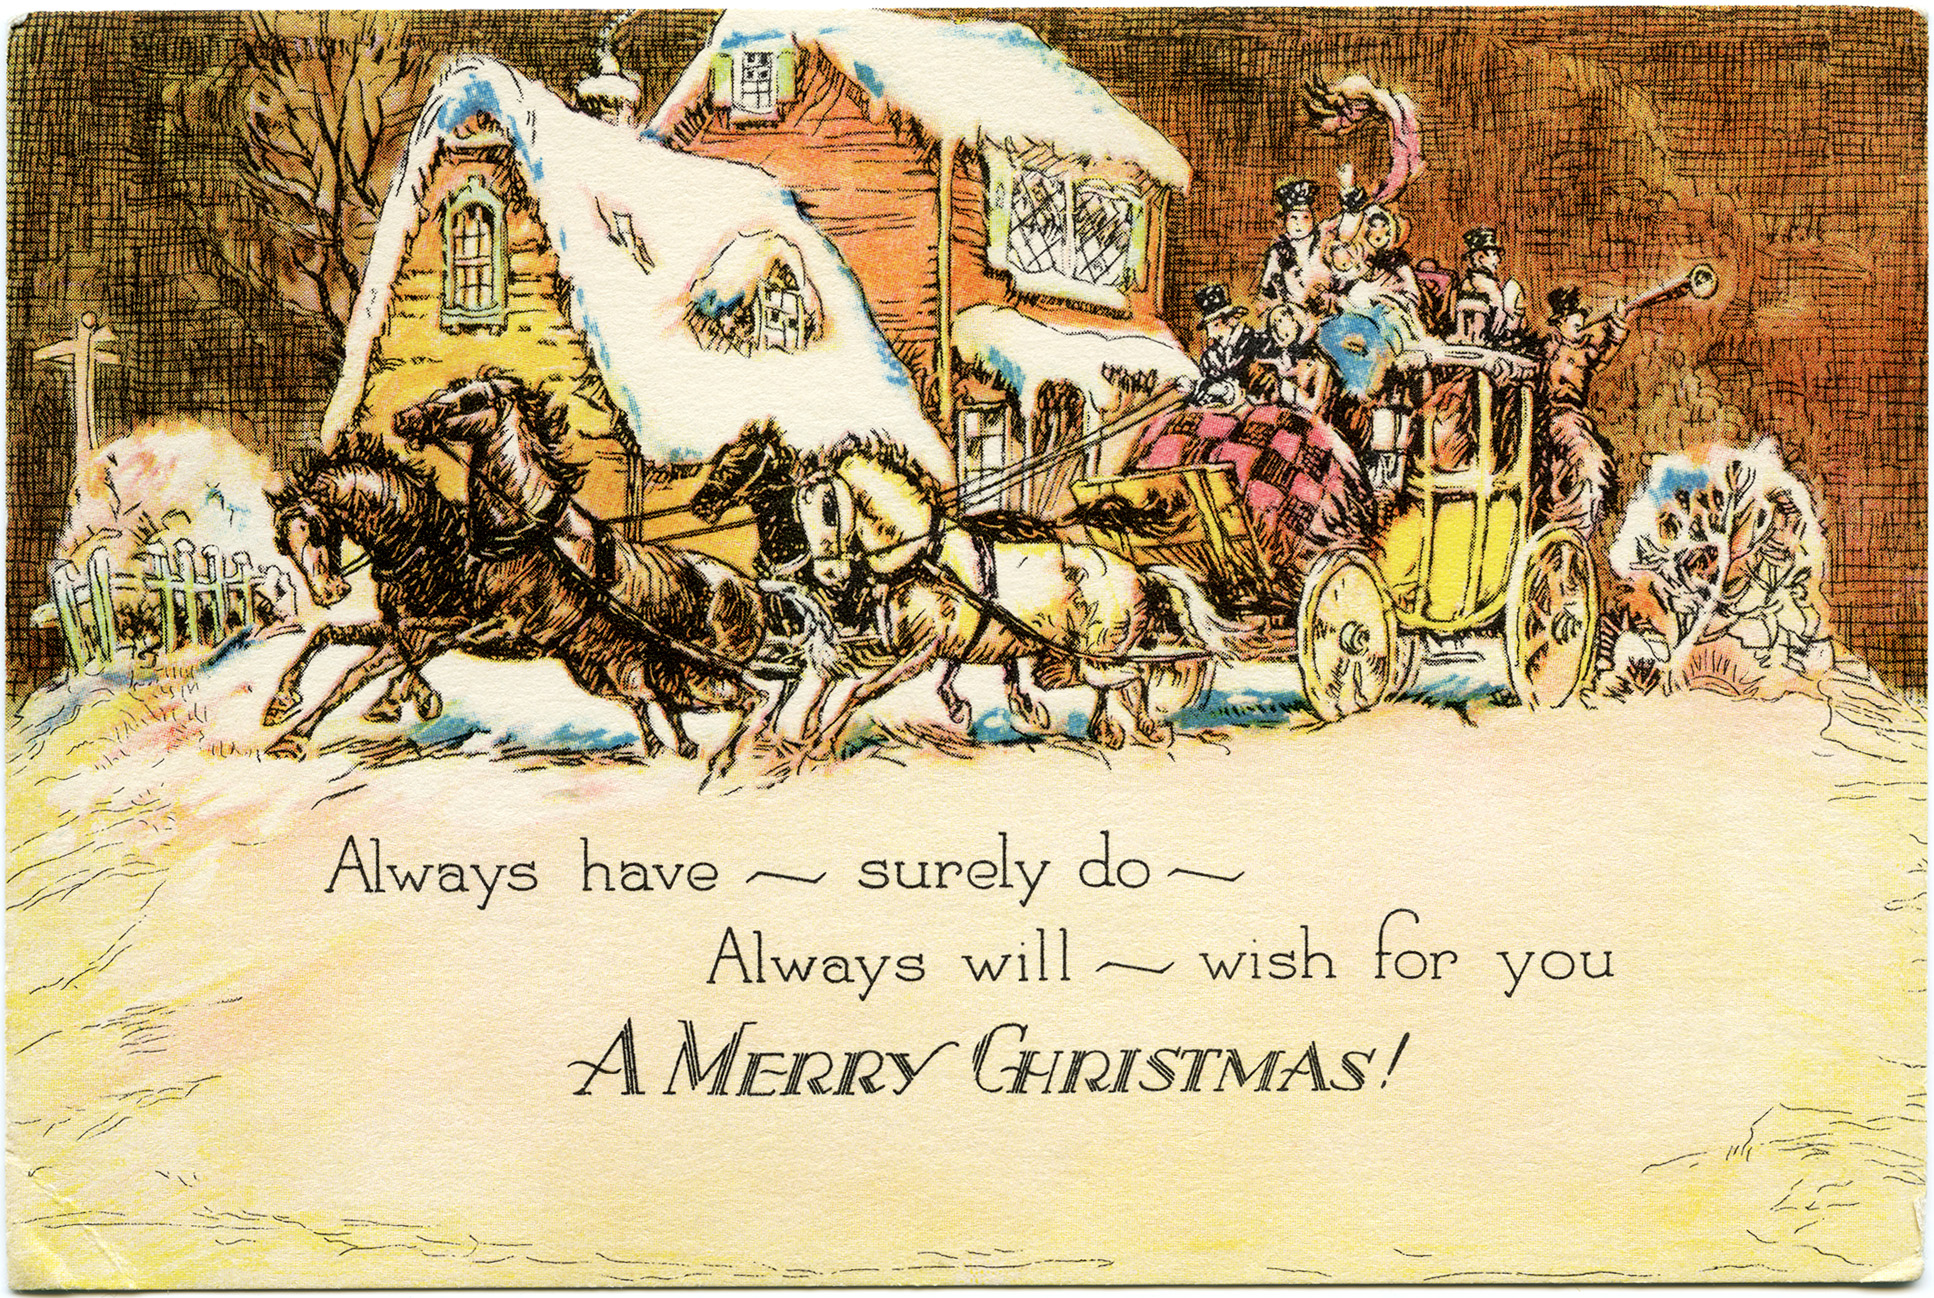 Horse And Carriage Christmas Card Free Vintage Image Old Design Shop Blog